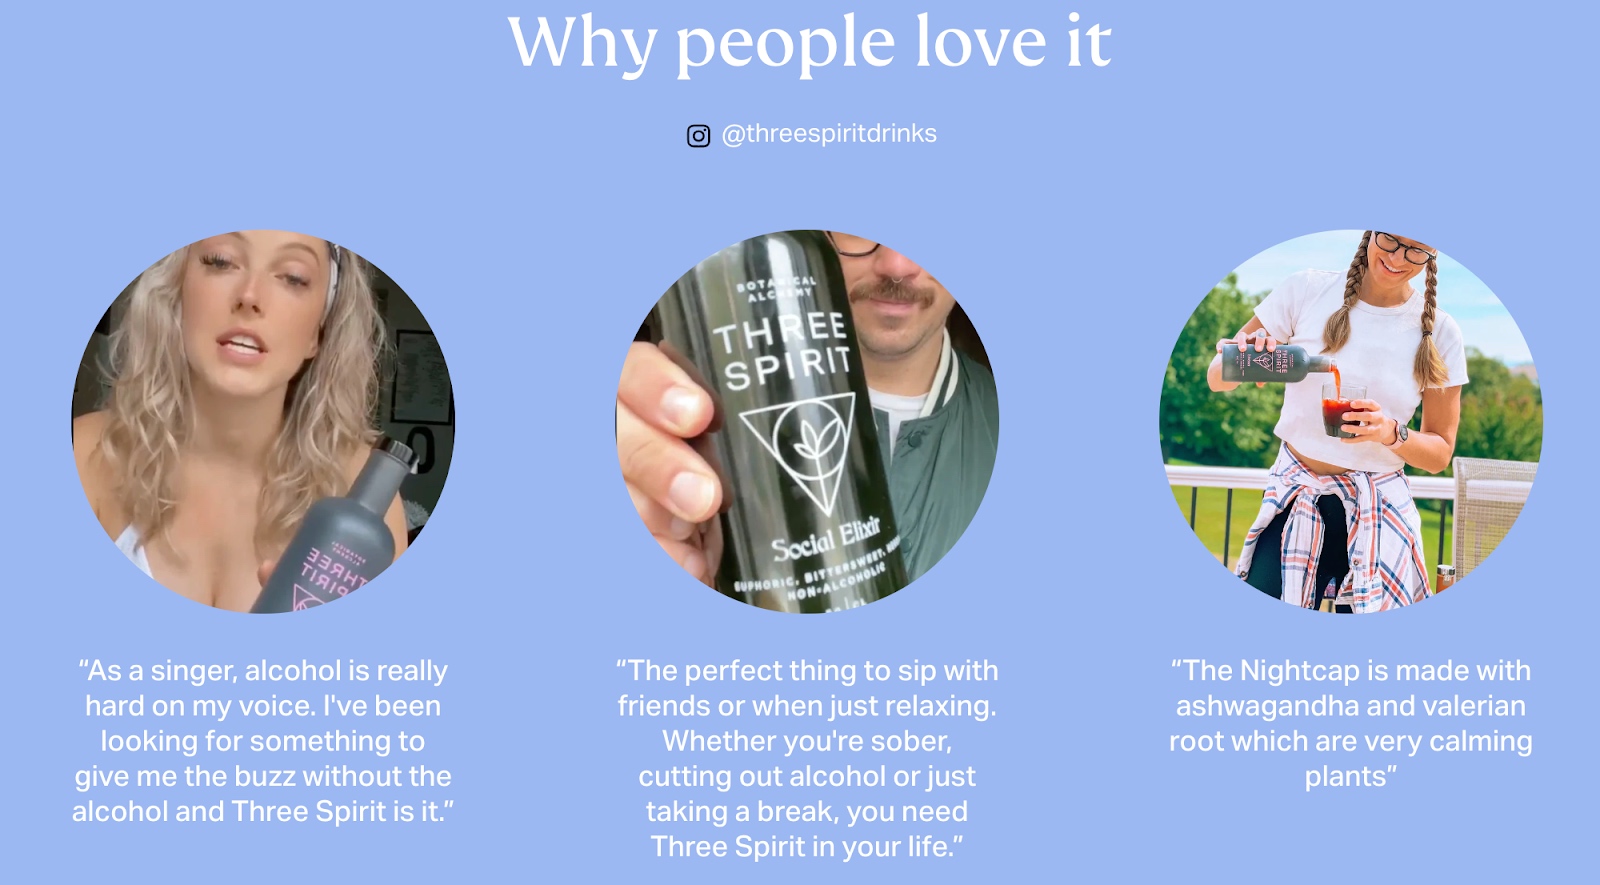 Three Spirit's "Why people love it" section of the homepage